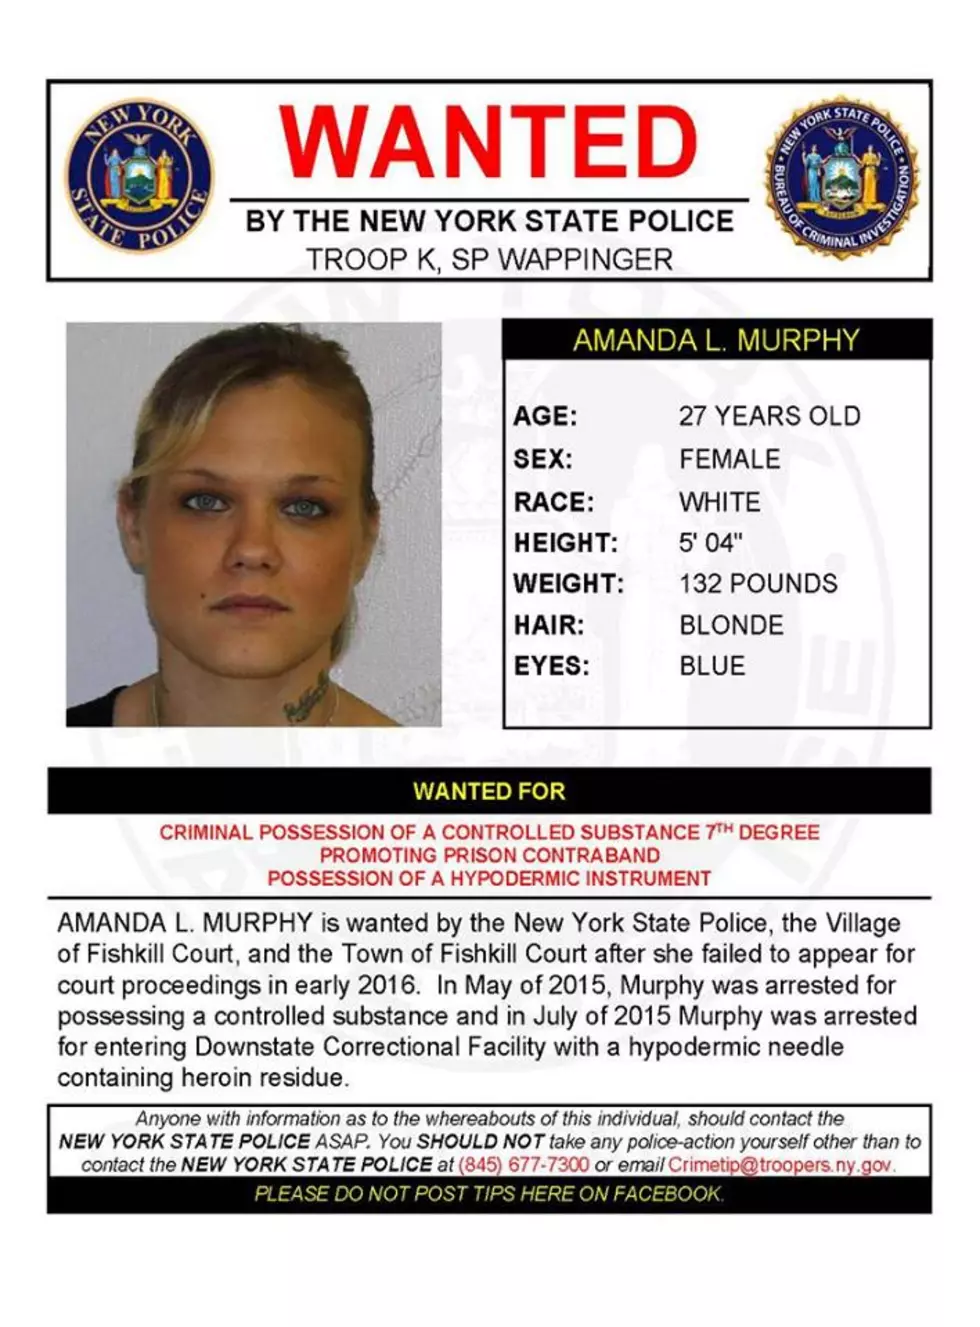 Warrant Wednesday: Dutchess County Woman Wanted For Promoting Prison Contraband